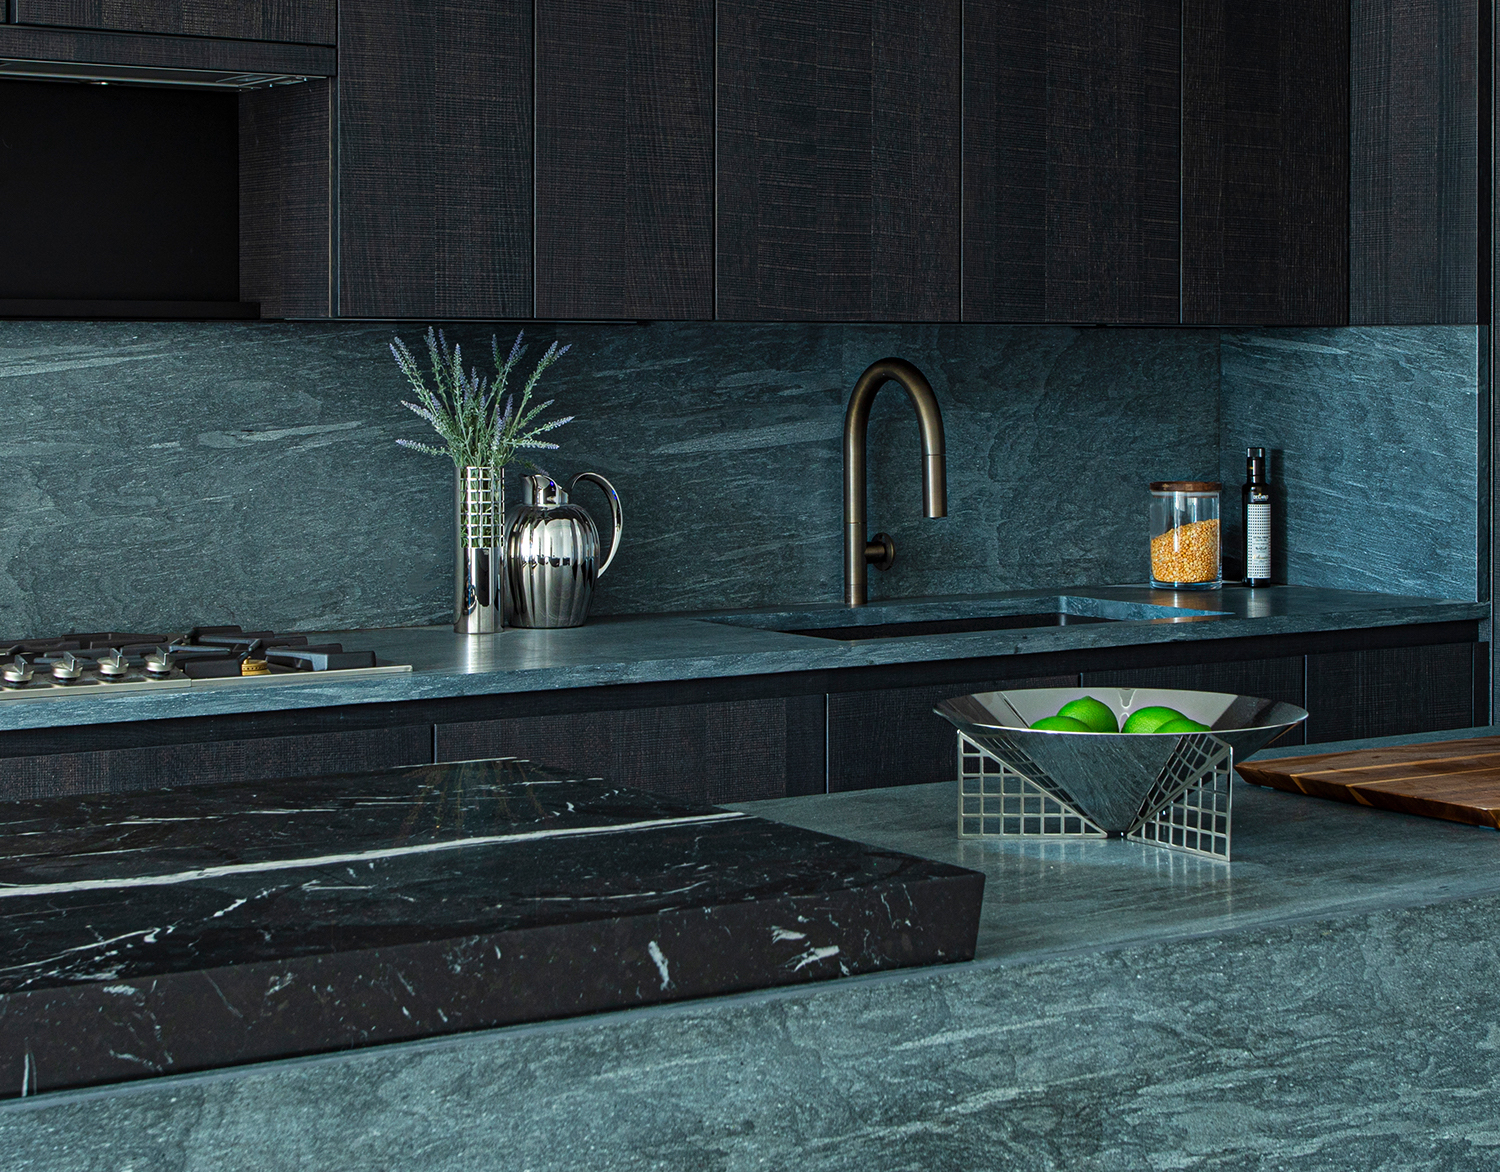 Elevate your kitchen with these dramatic sinks